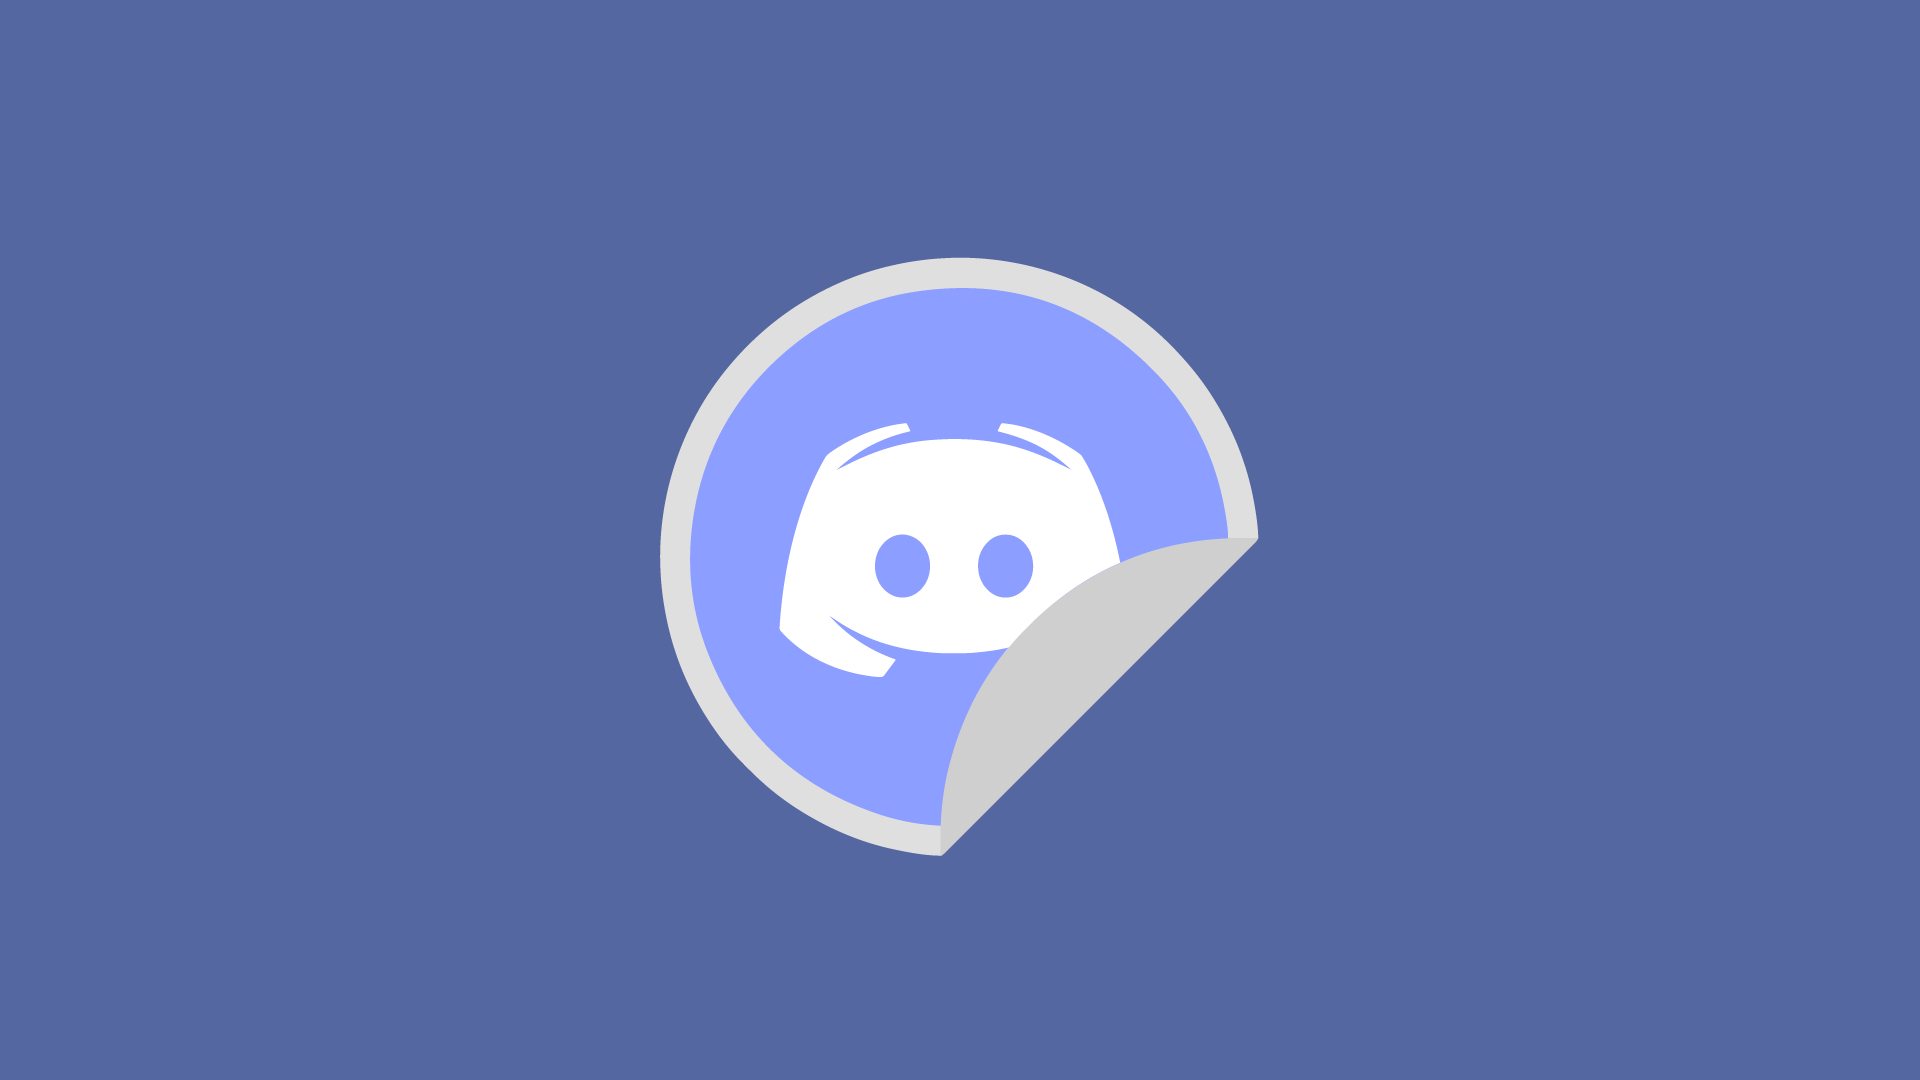 Discord is much more fun now with stickersandroidpolice.com